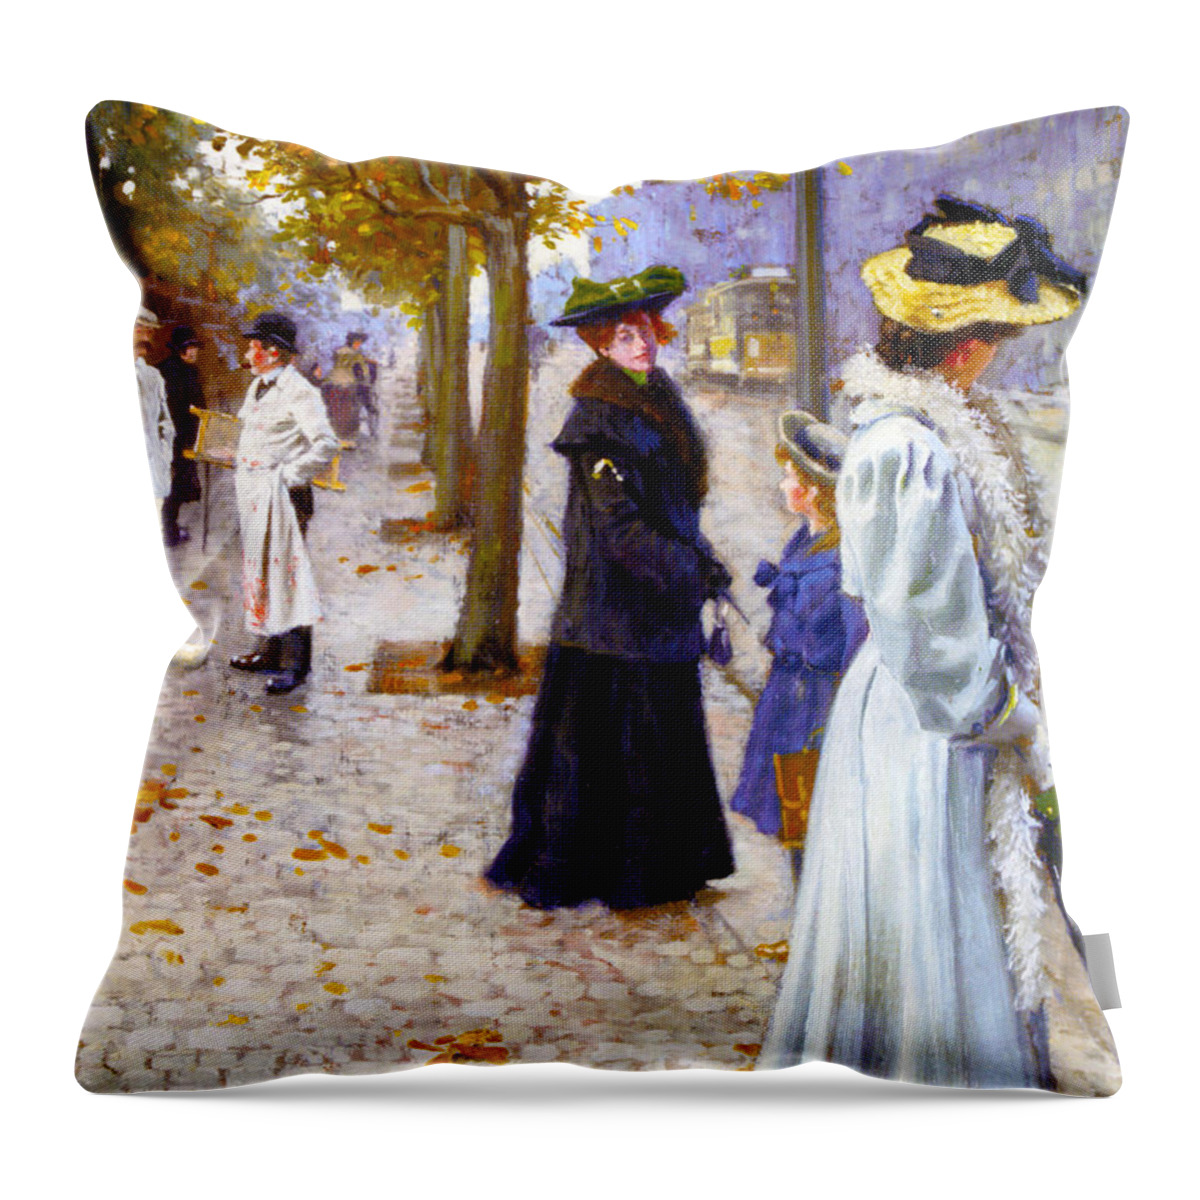 Waiting On The Tram Throw Pillow featuring the photograph Waiting On The Tram by Paul Gustav Fischer